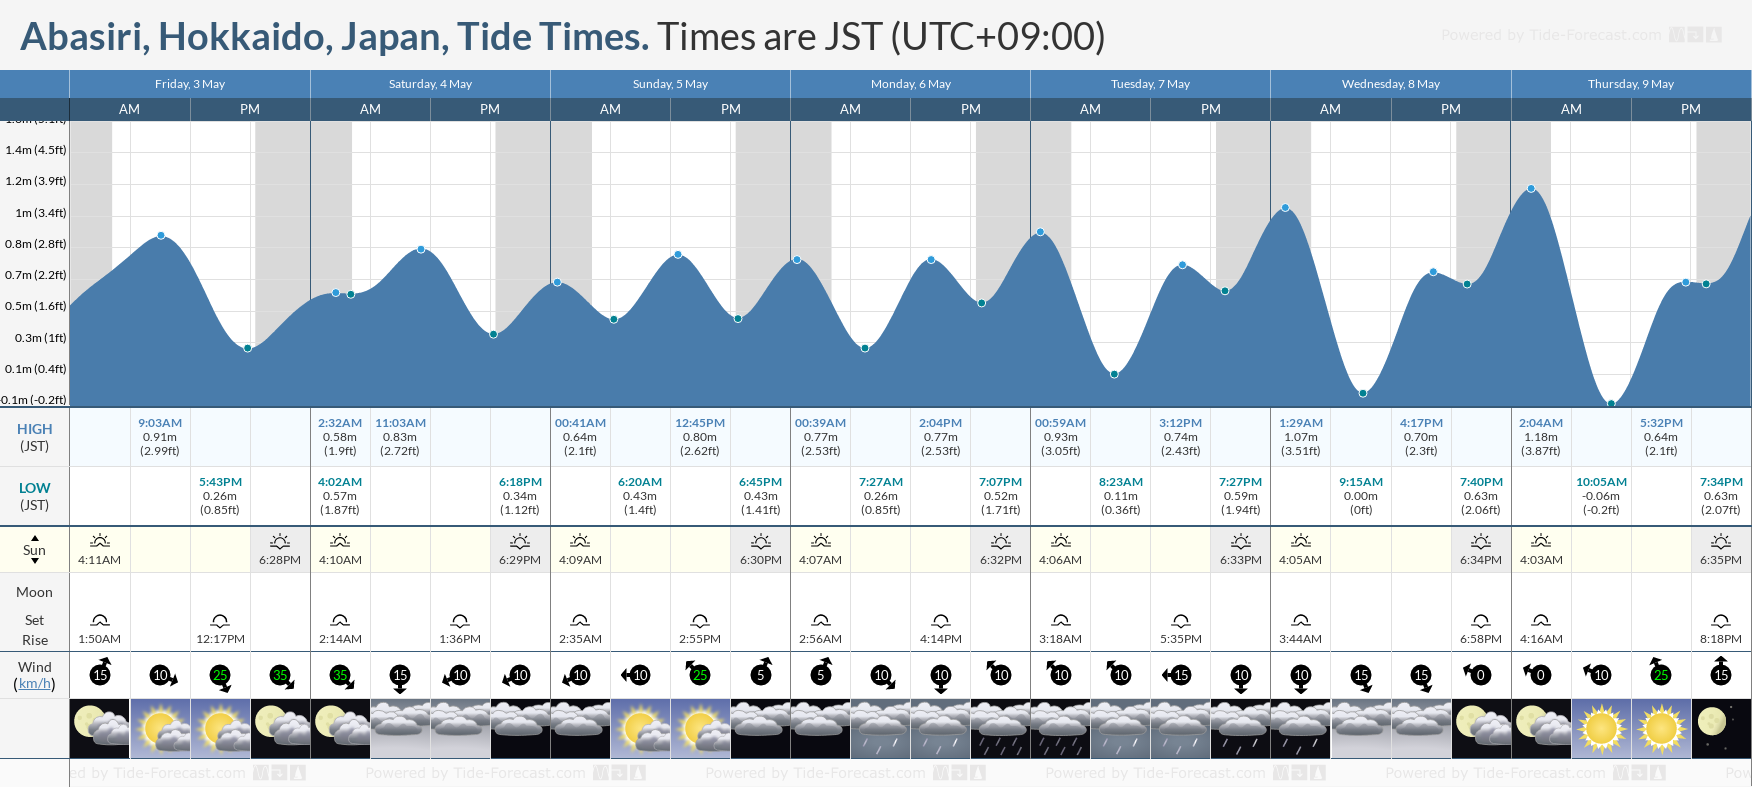 Abasiri, Hokkaido, Japan Tide Chart including high and low tide tide times for the next 7 days